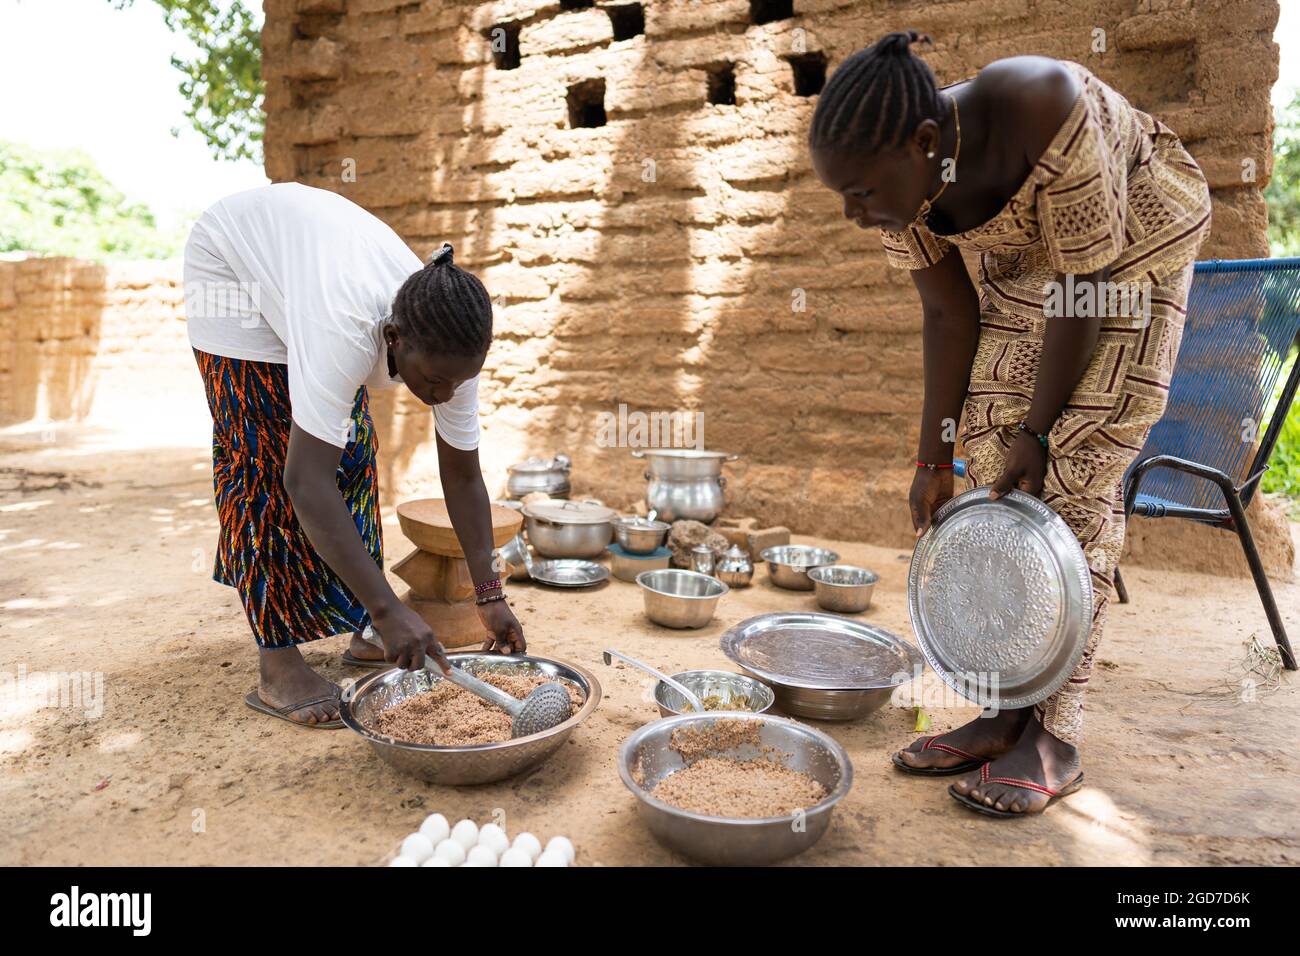 In this image, two young black women are preparing a meal for their family members in outdoor air kitchen in a west african village Stock Photo